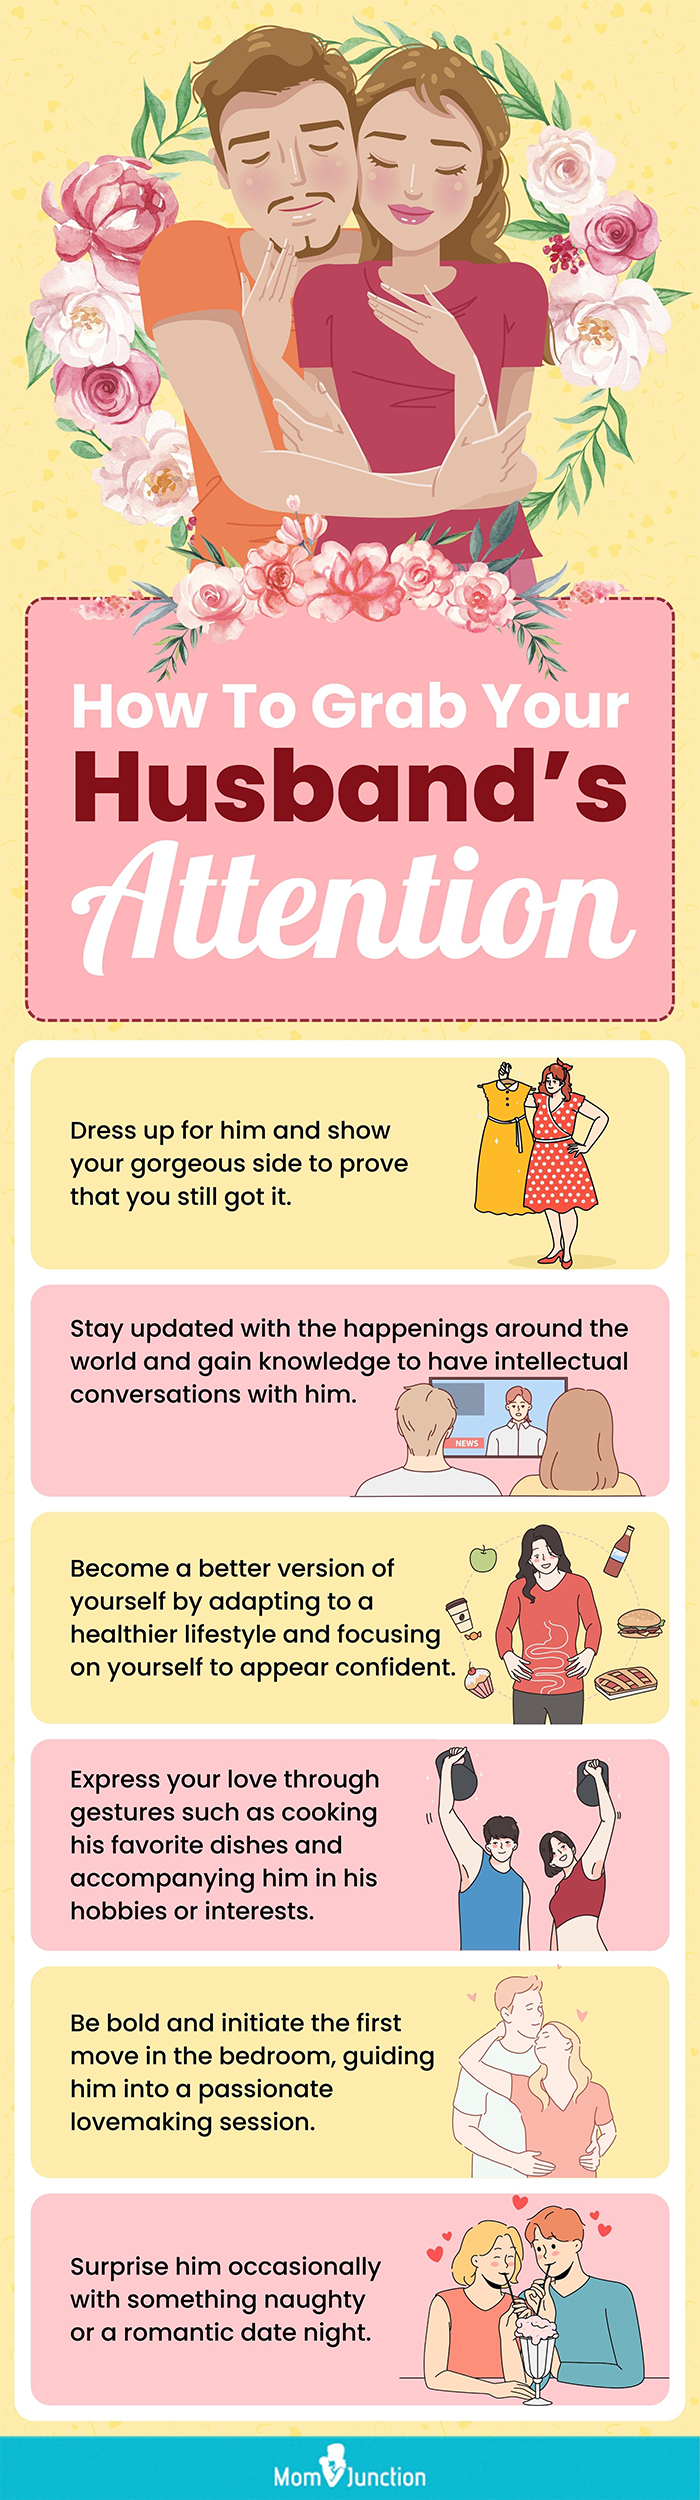 How To Impress Your Husband 12 Tricks To Attract Him All Again